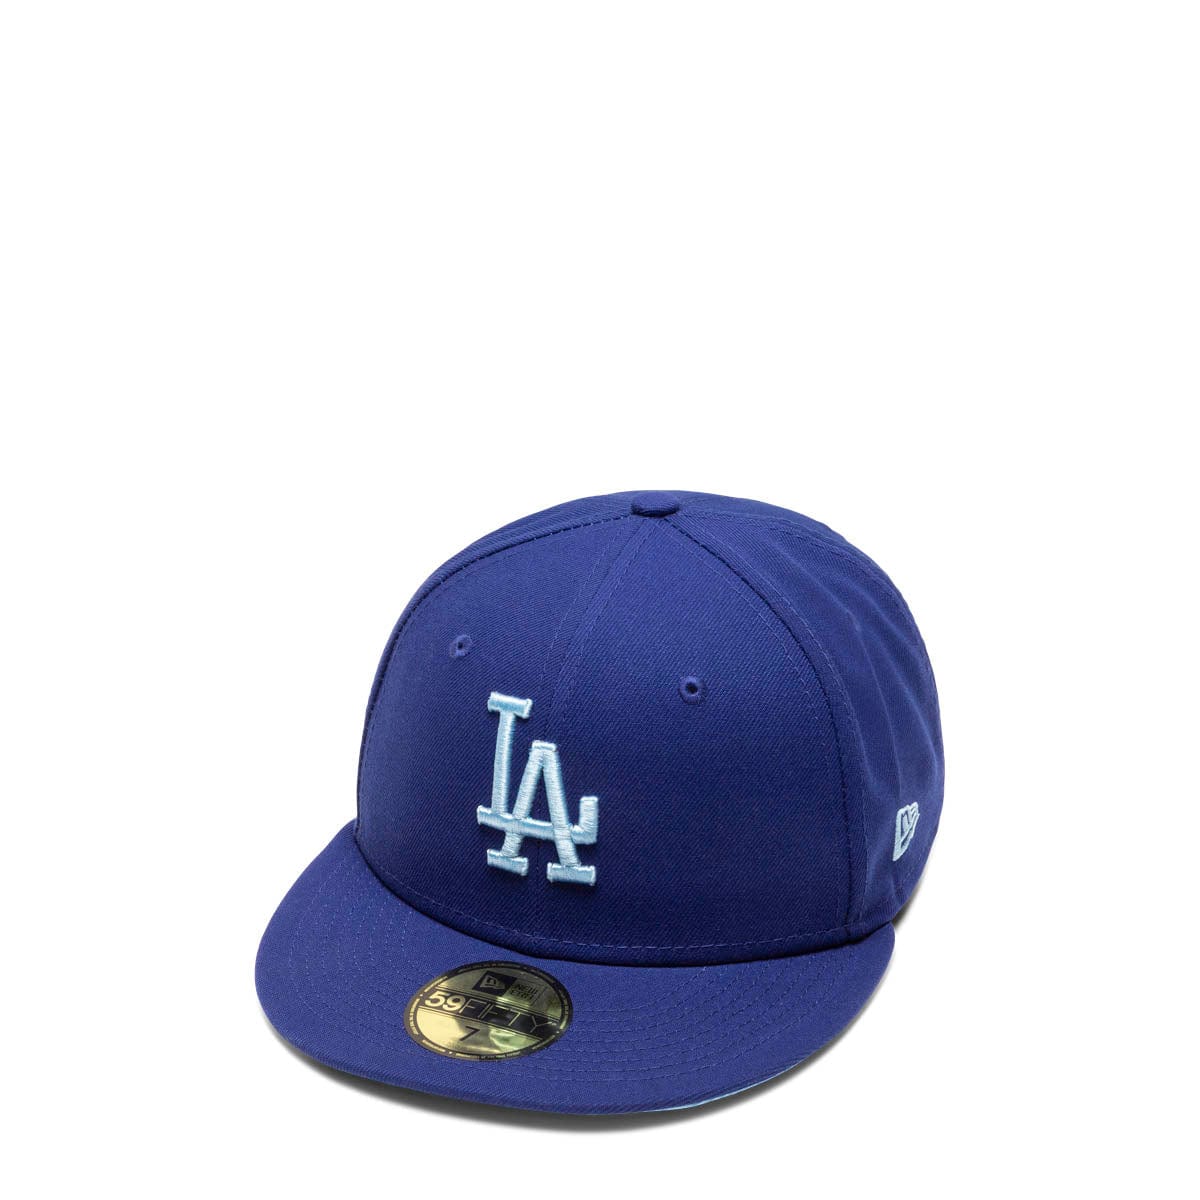 New Era Headwear 59FIFTY LOS ANGELES DODGERS CLOUD UNDER FITTED CAP